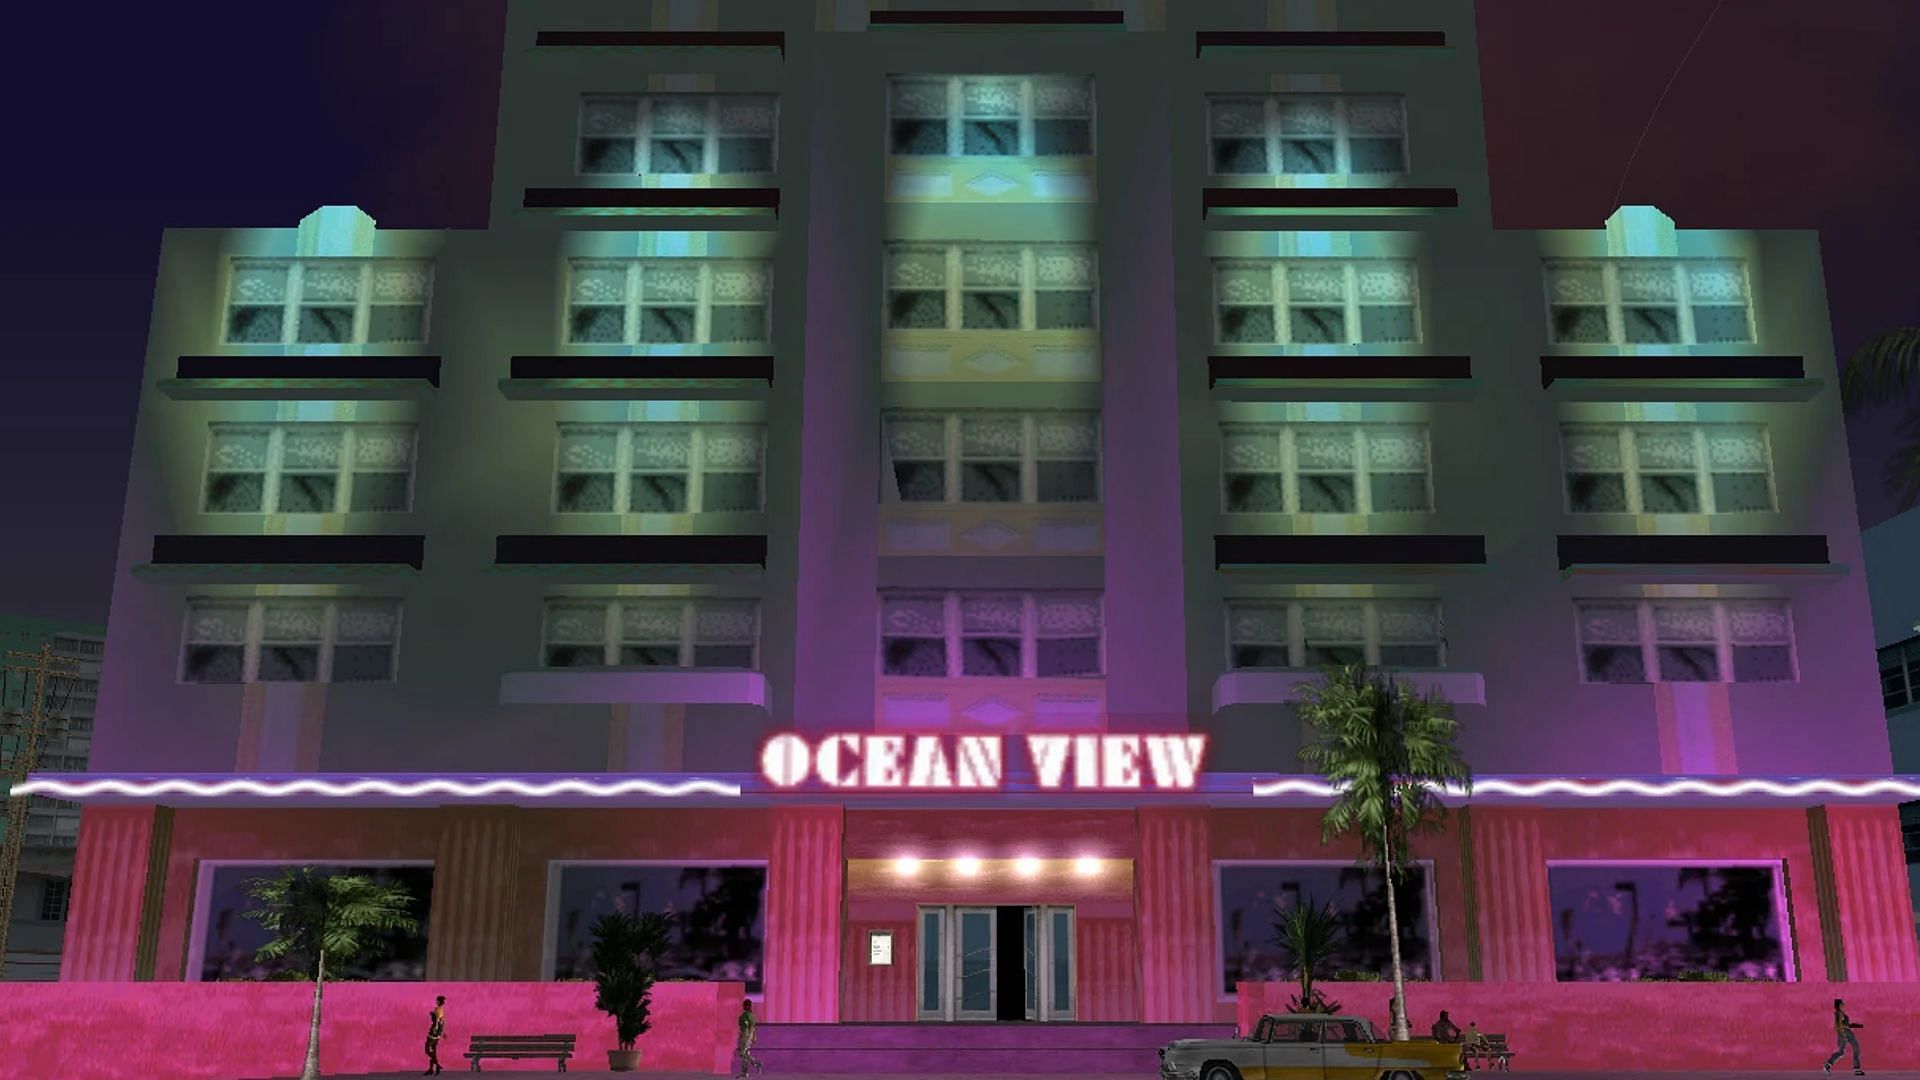 This setting is more ambiguous based on the file names, but Ocean View likely refers to this iconic hotel (Image via Rockstar Games)